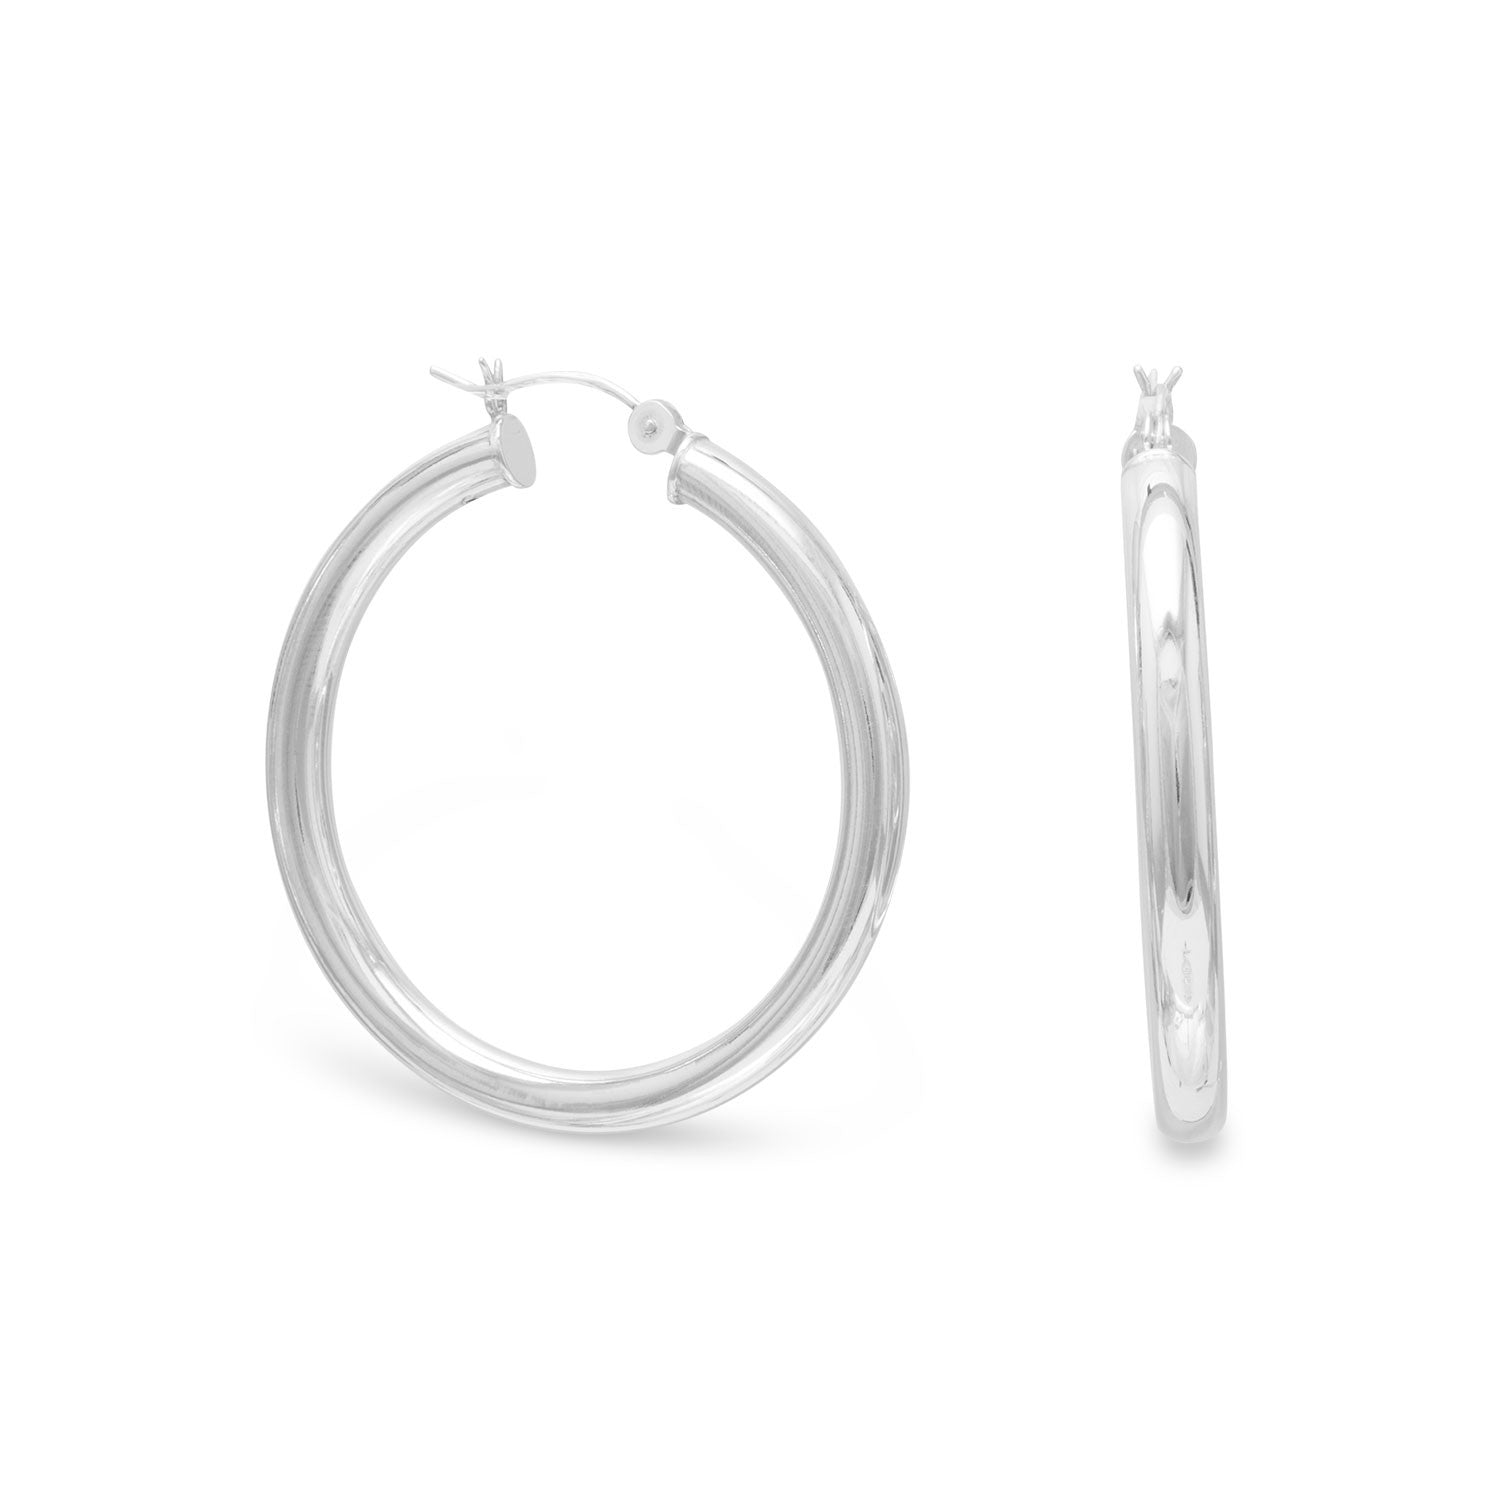 4mm x 40mm Hoop Earrings with Click